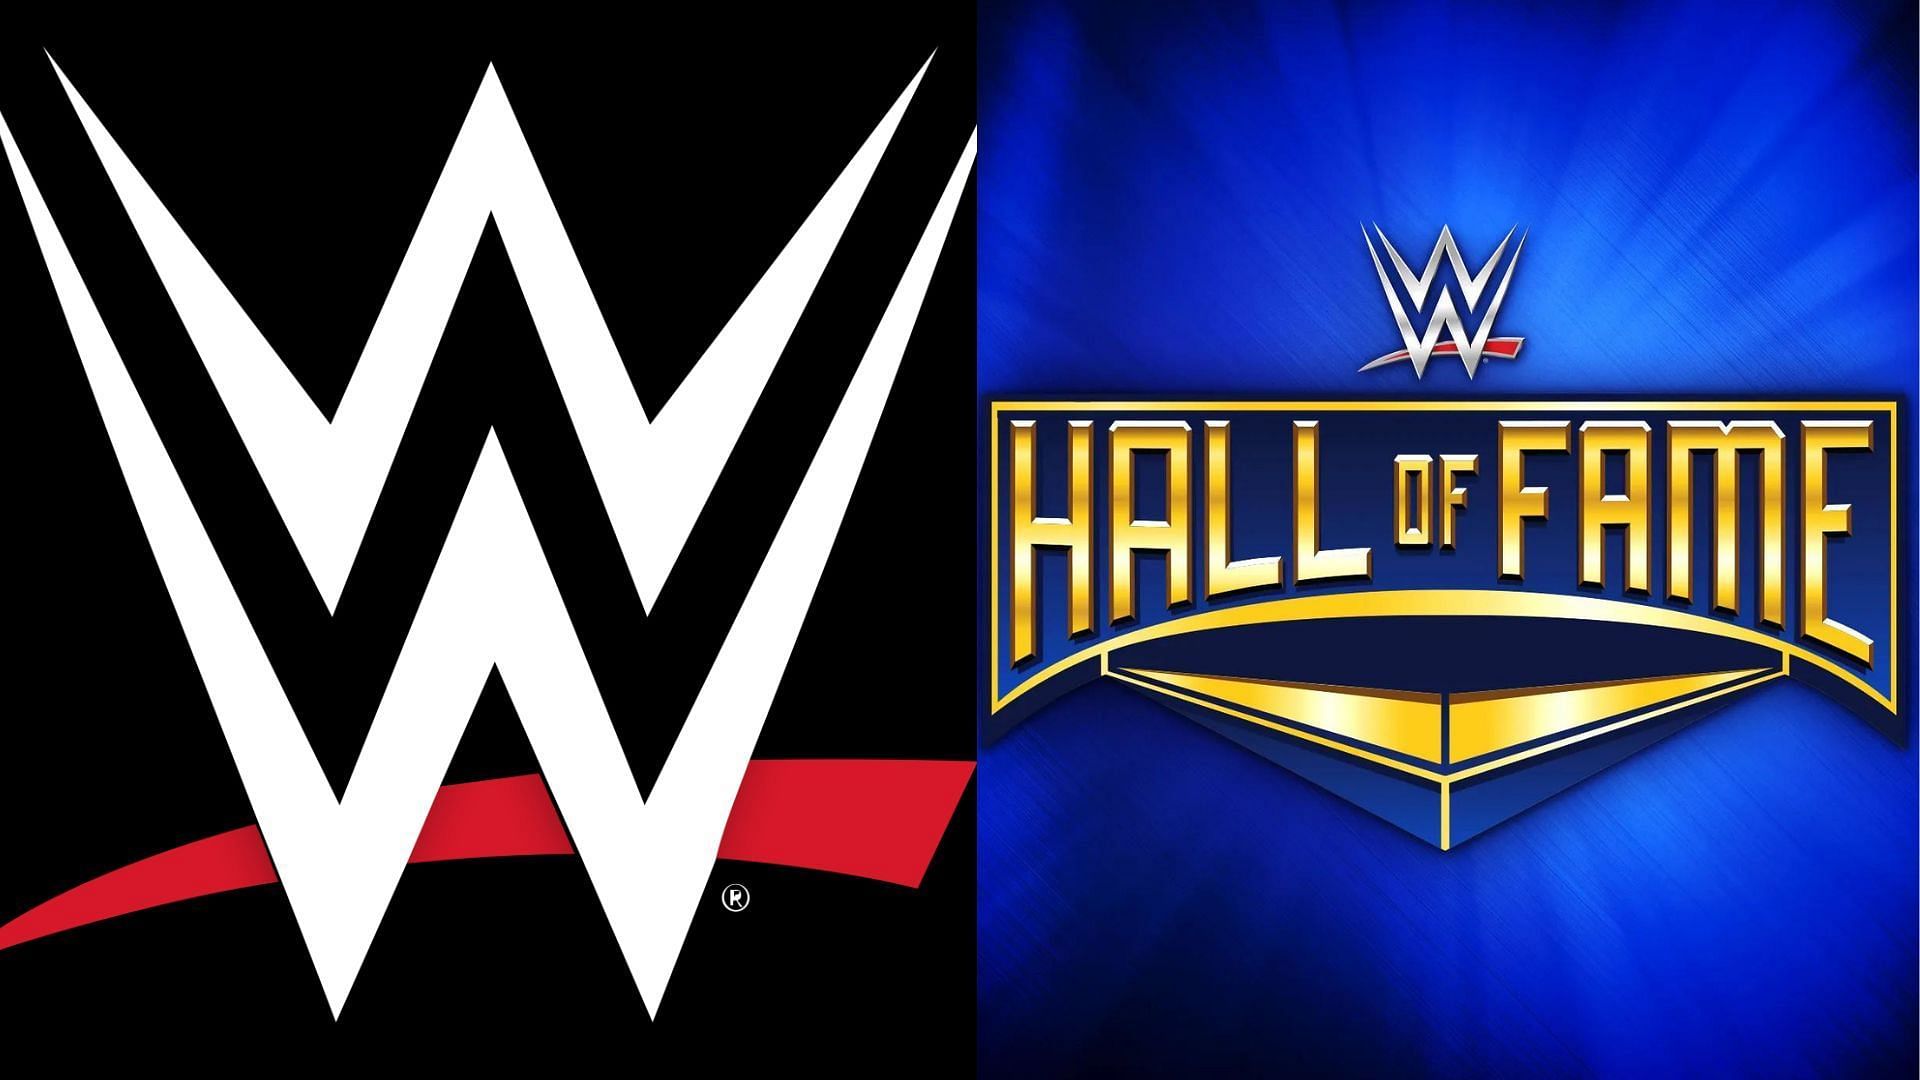 A couple of WWE Hall of Famers changed their names on social media. 